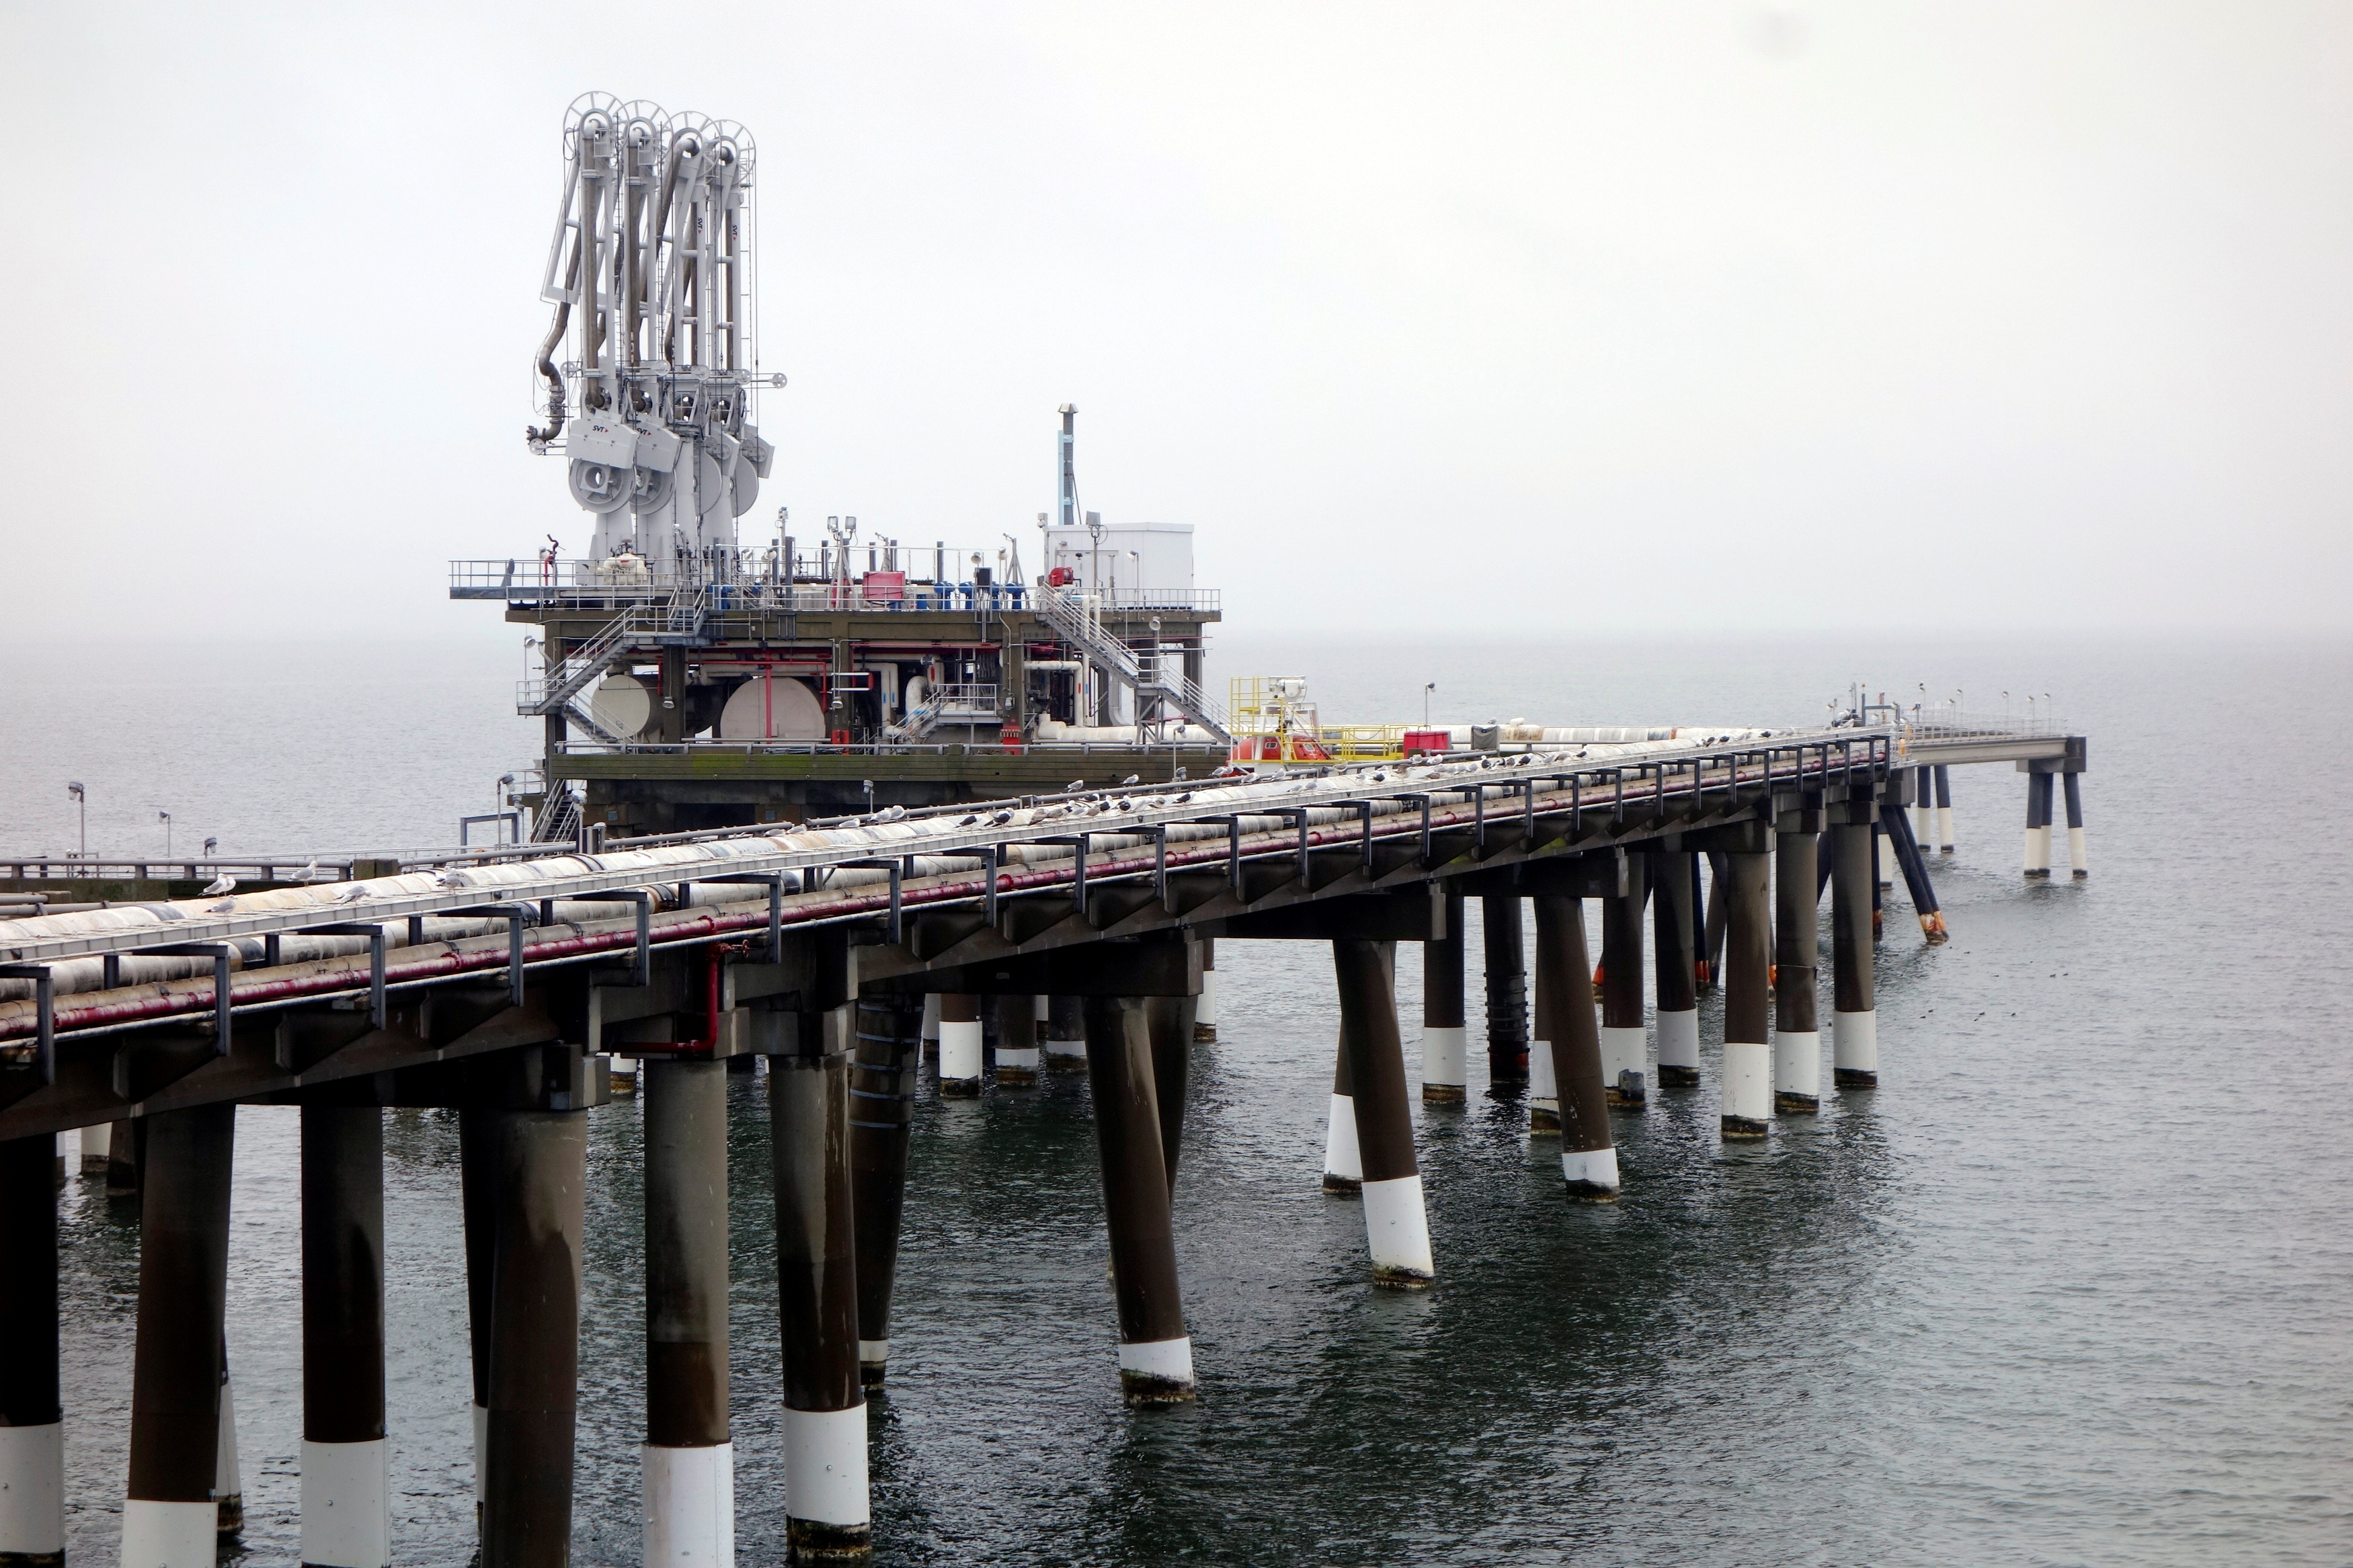 Pier at Dominion's Cove Point LNG plant is seen at Maryland's Chesapeake Bay